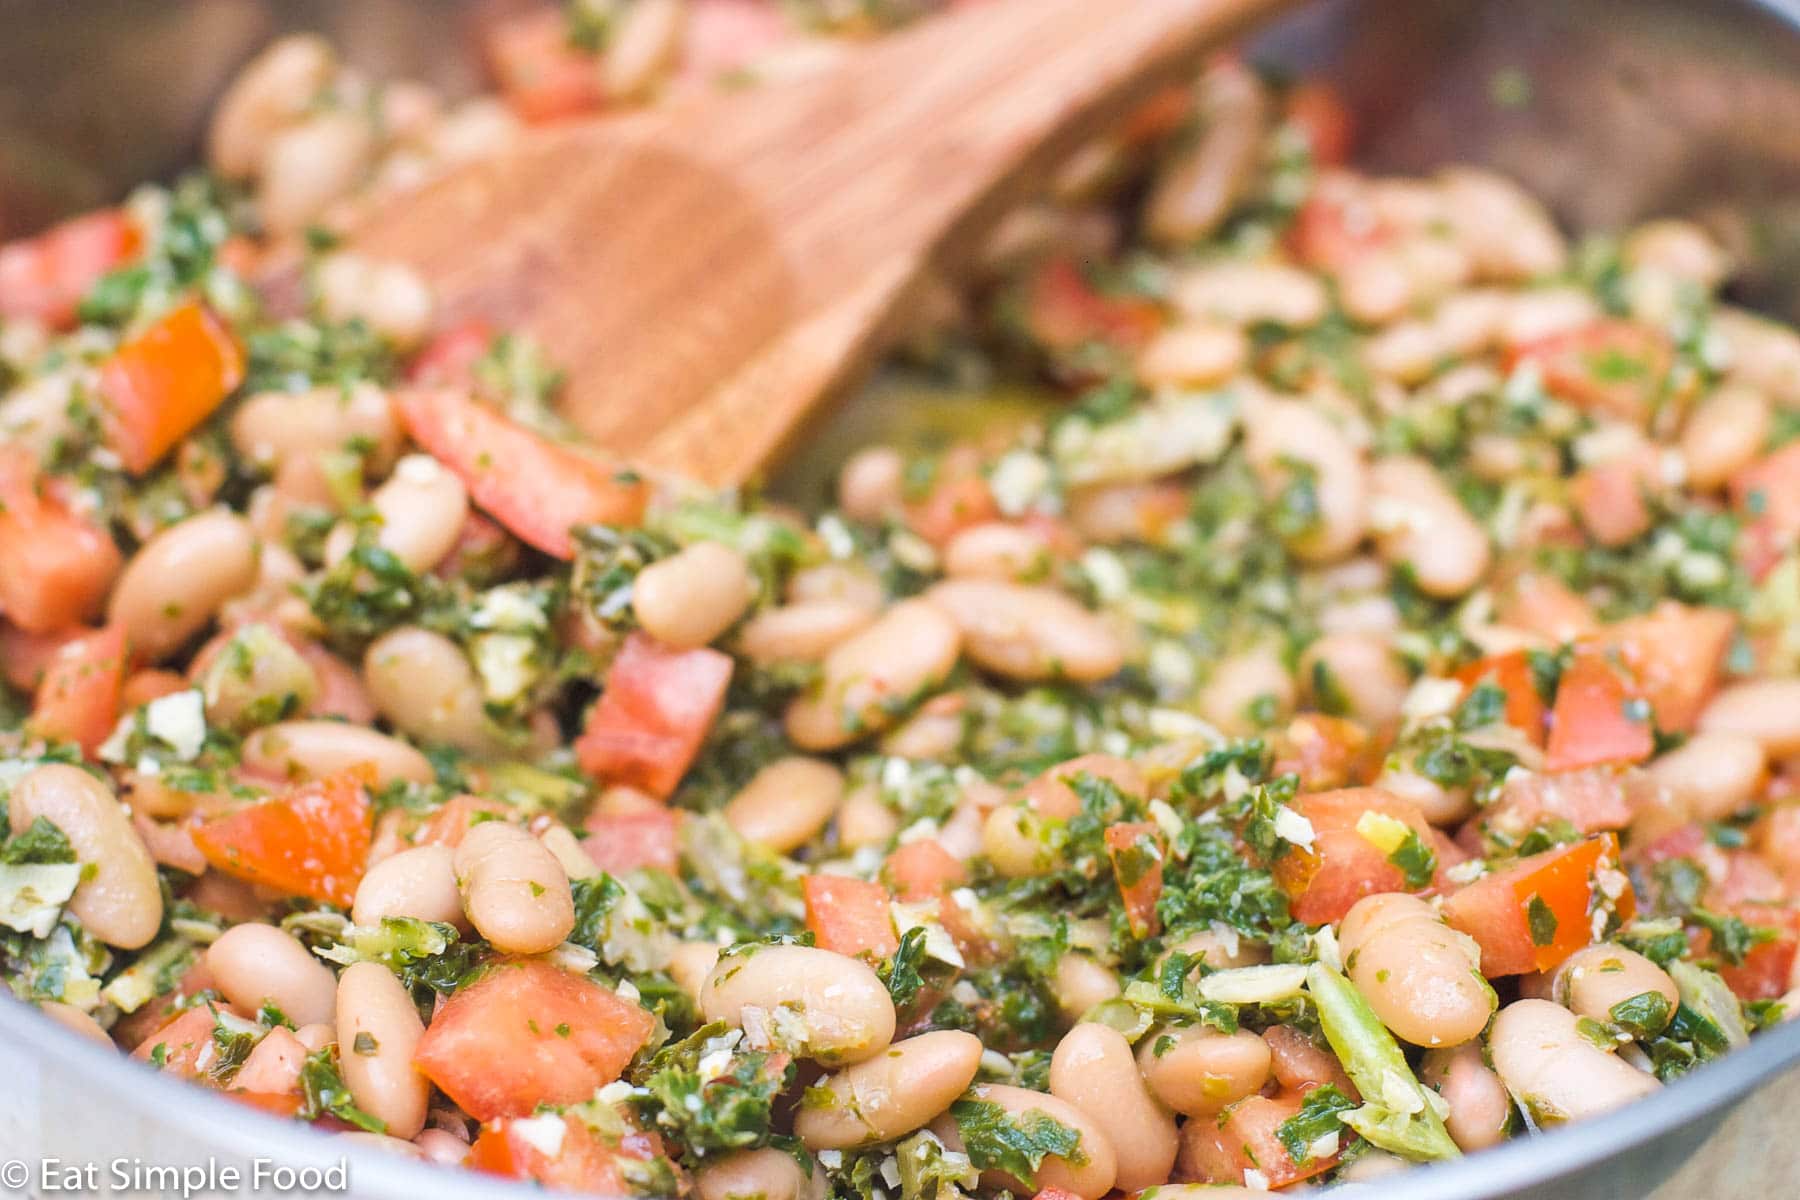 Stainless steel deep skillet filled with white beans and diced tomatoes with a lightly pulsed pesto of kale and almonds with a wood spoon. Close up.